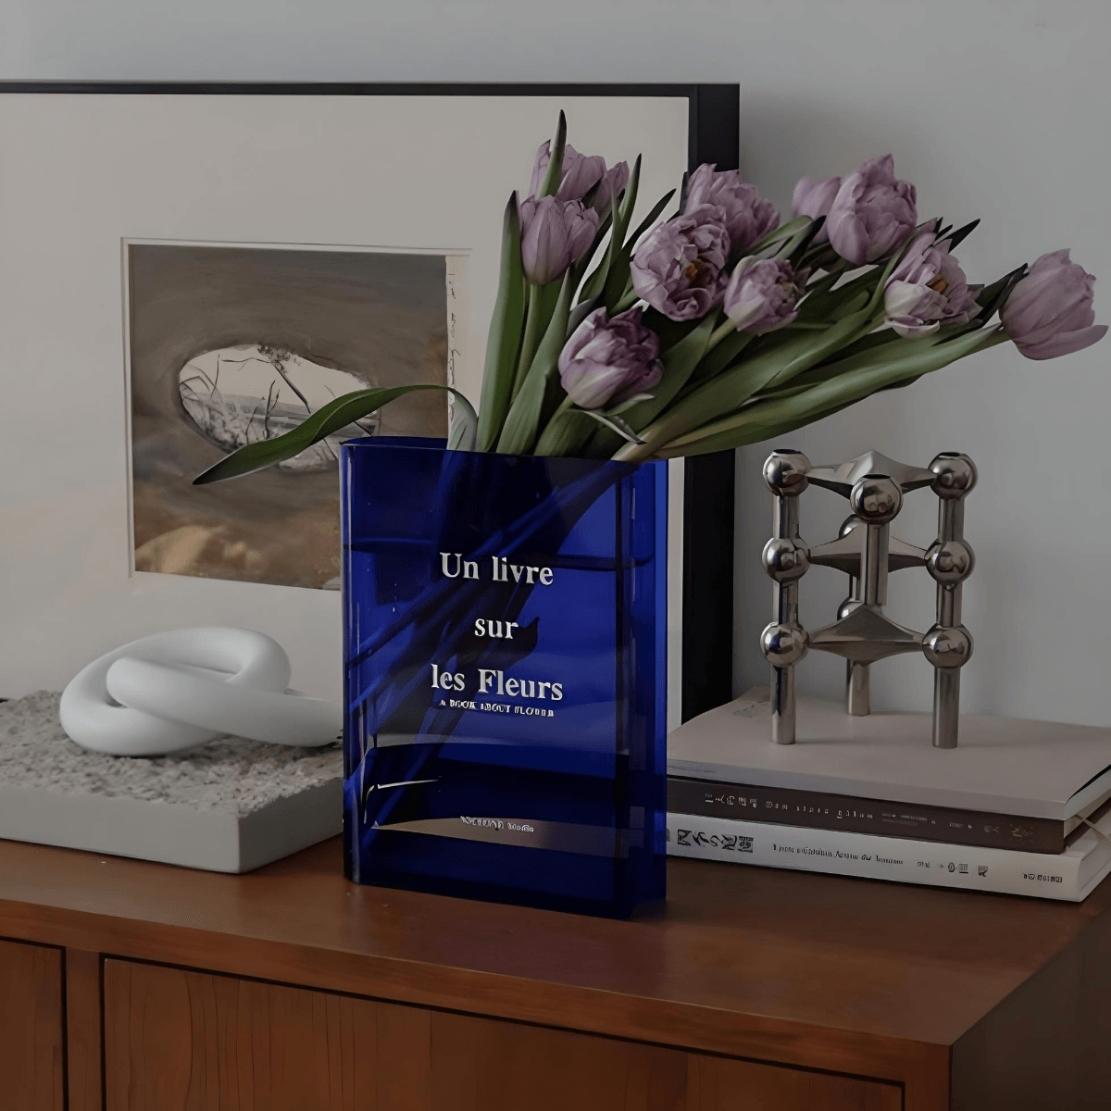 Blue acrylic book vase with text on shelf with purple tulips